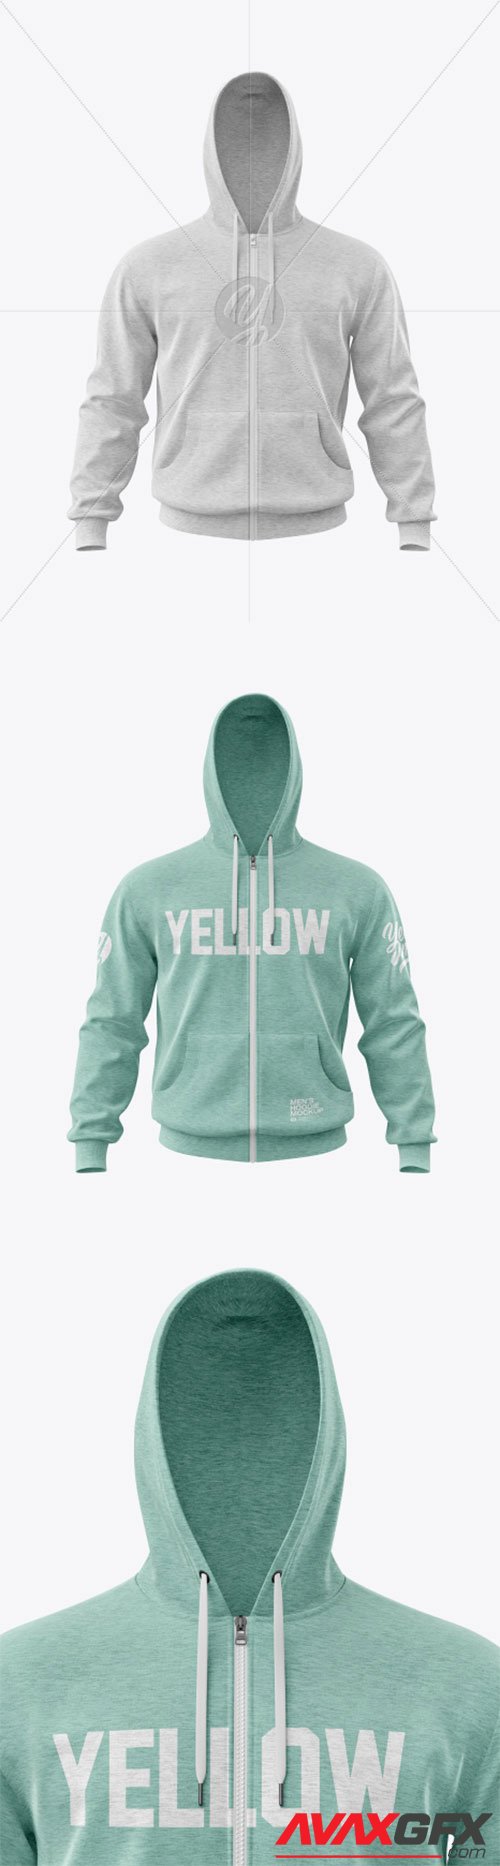 Download Men's Hoodie Front View HQ Mockup 10562 » AVAXGFX - All ...